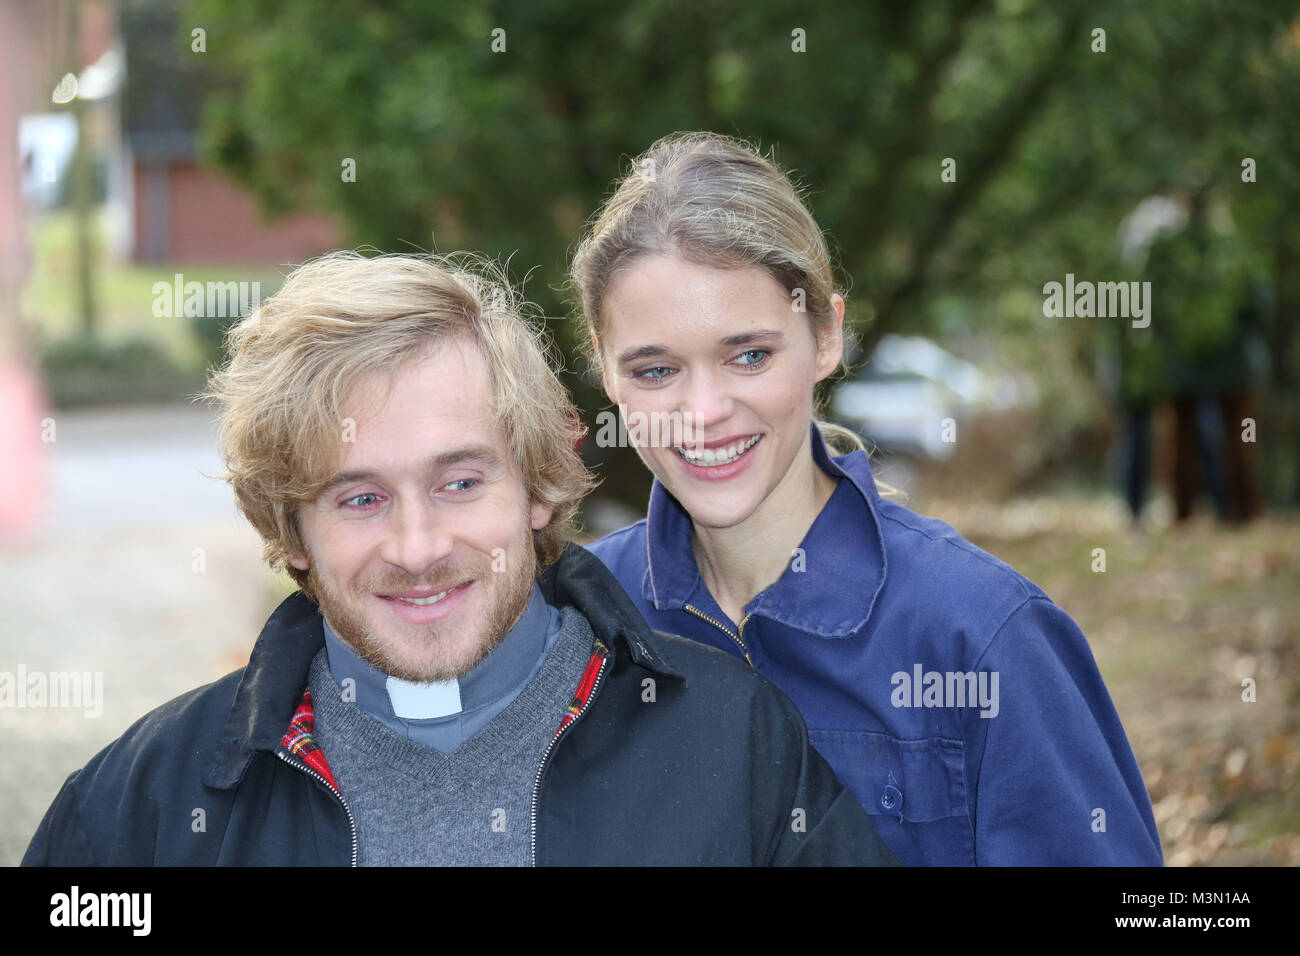 Page 2 - Peter Koch High Resolution Stock Photography and Images - Alamy